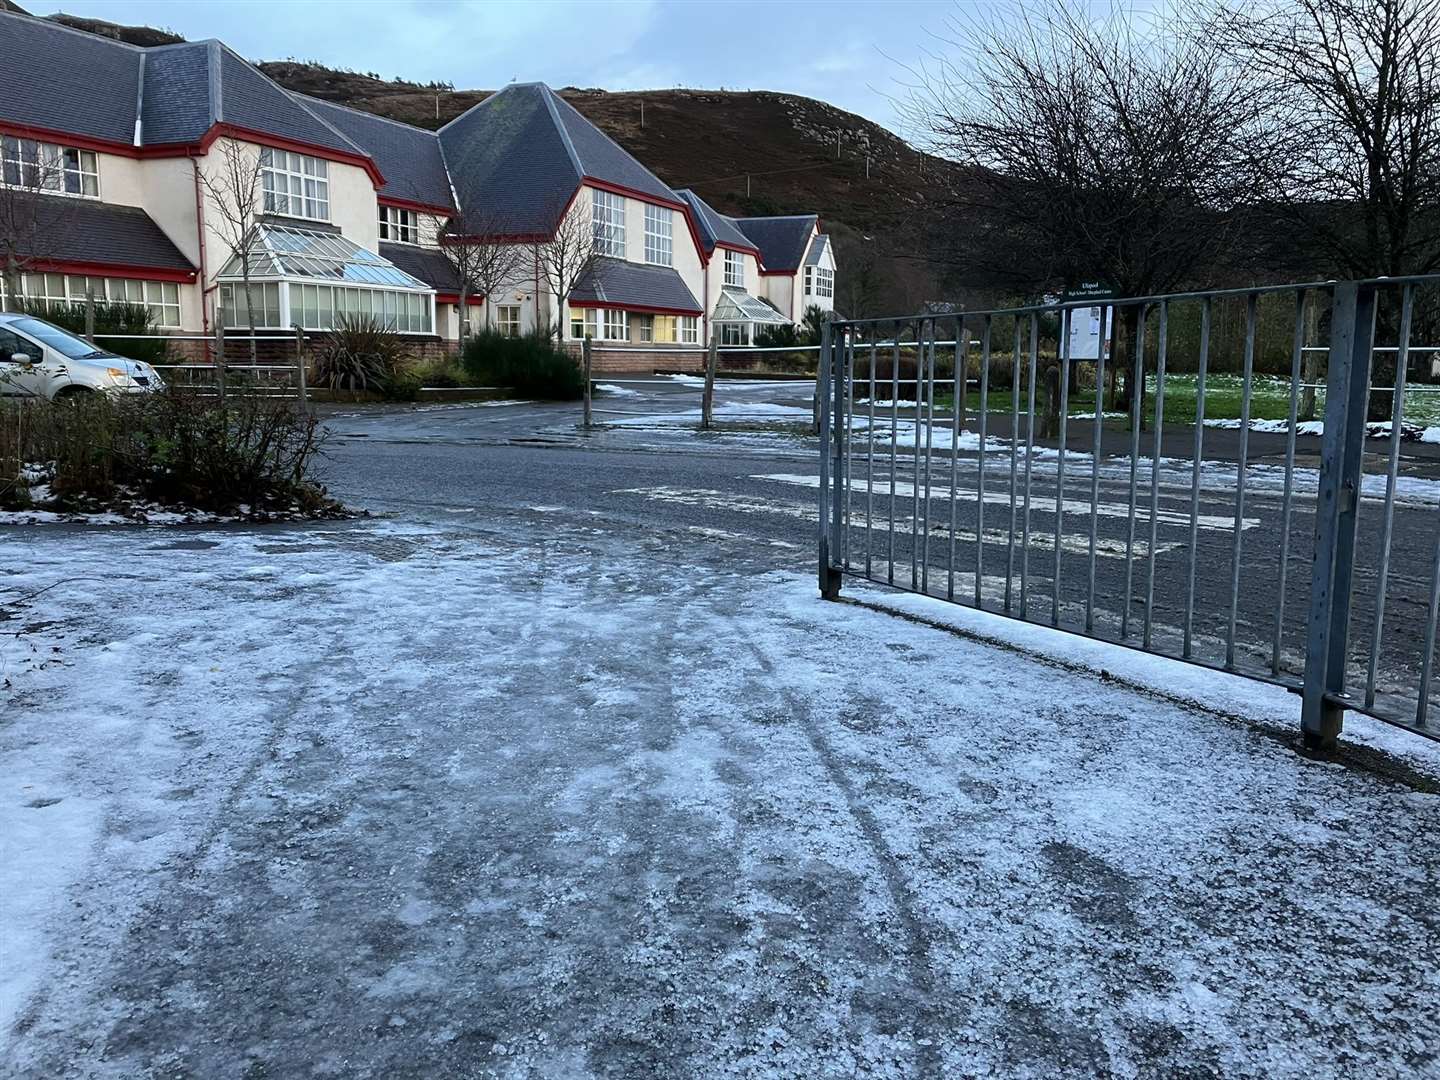 Icy roads have halted school transport in many areas where there have also been challenges keeping pavements clear.